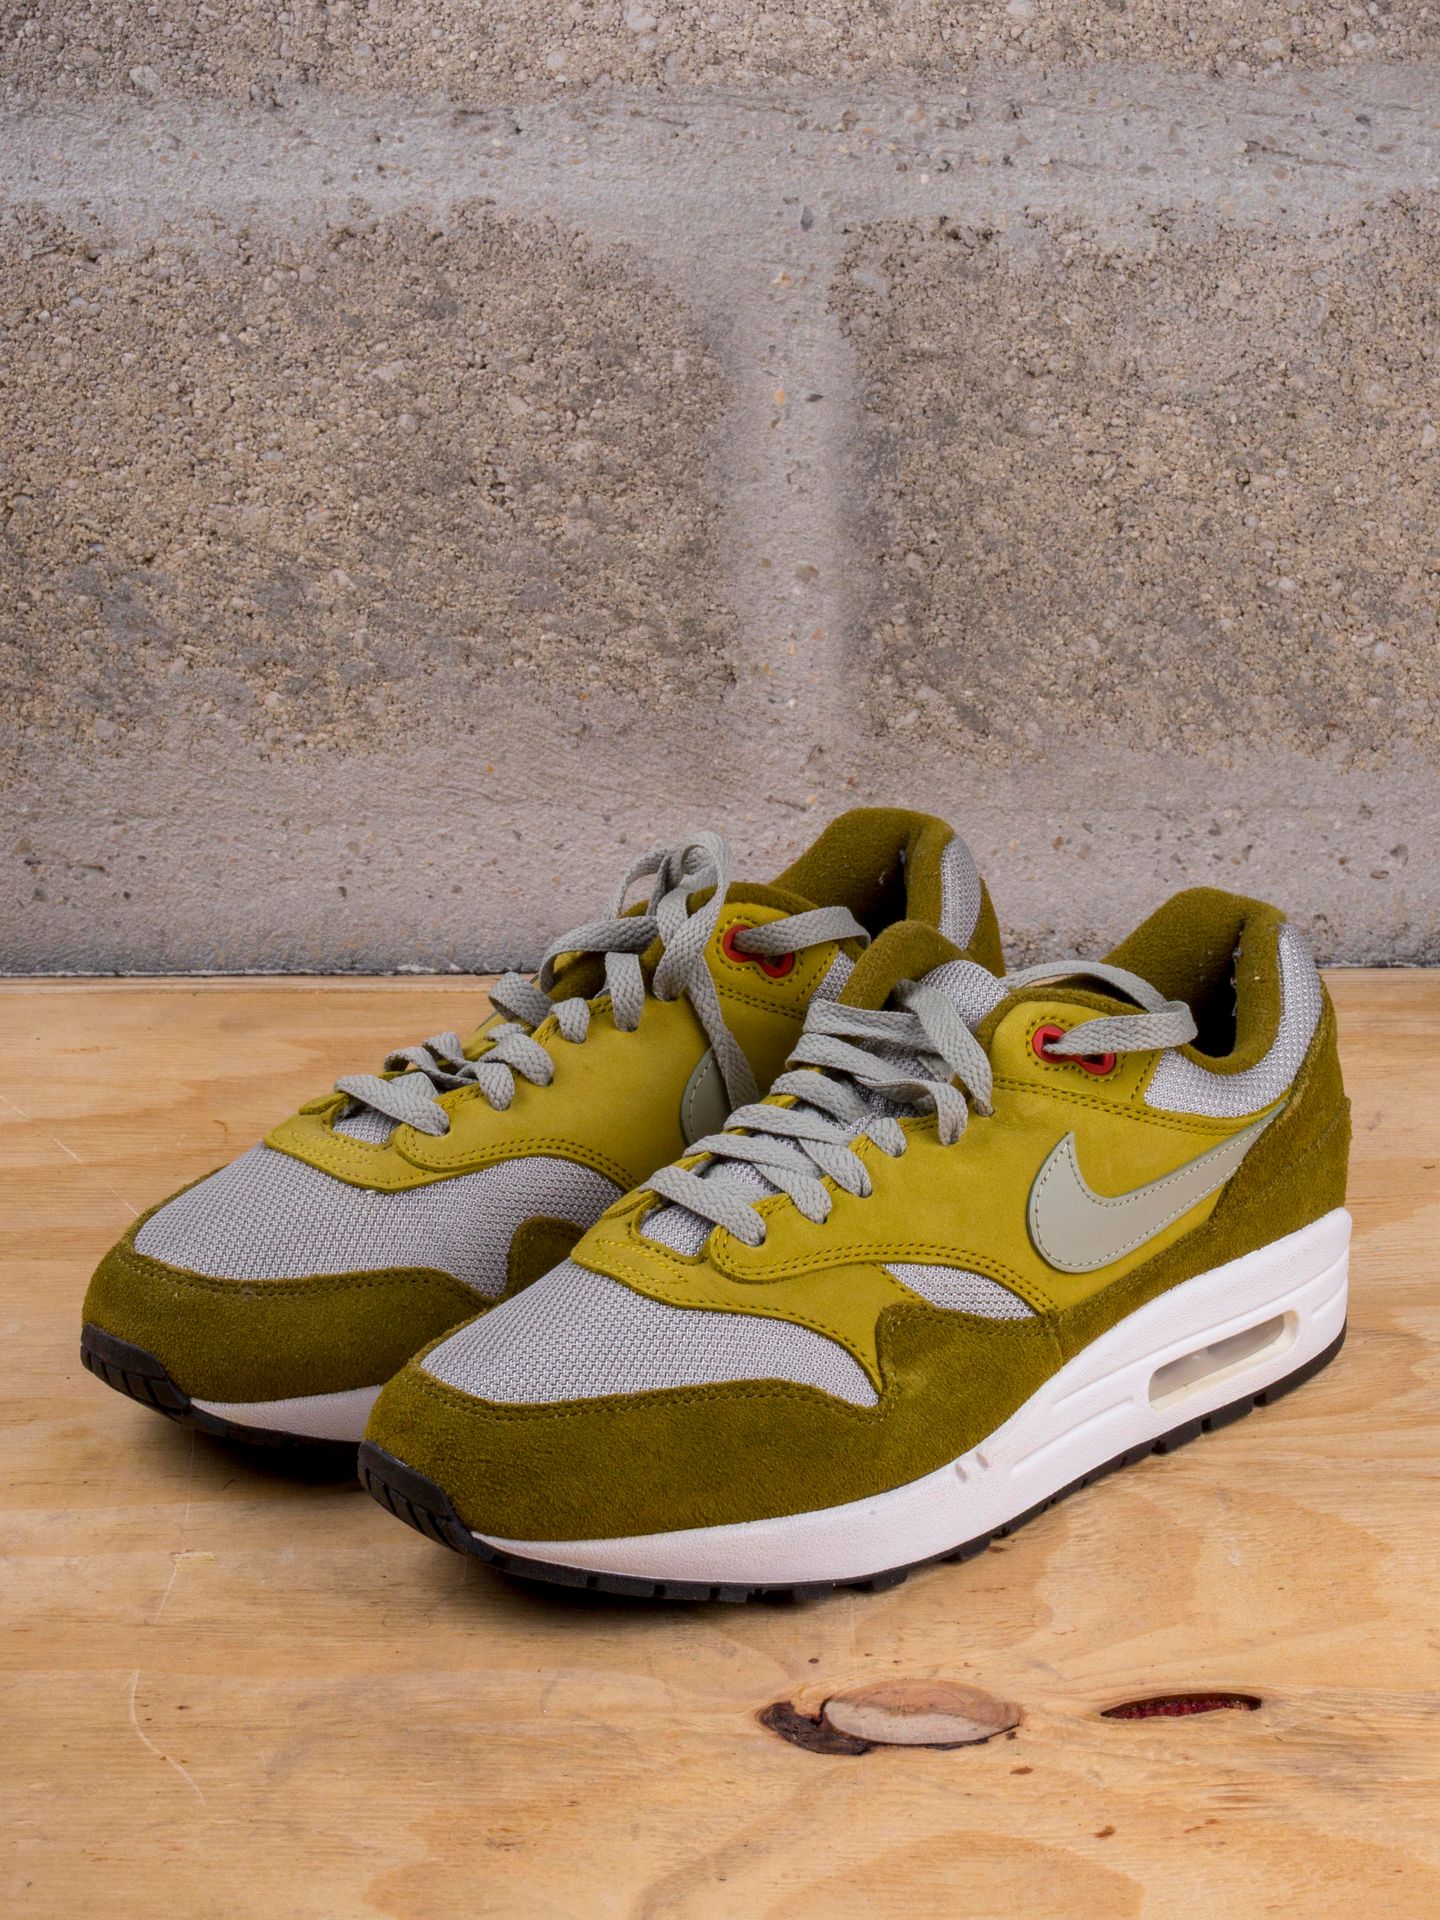 Null NIKE AIR MAX 1

Curry Pack (Olive)

(908366-300)

US 8 / EU 41

(Guter Zust&hellip;